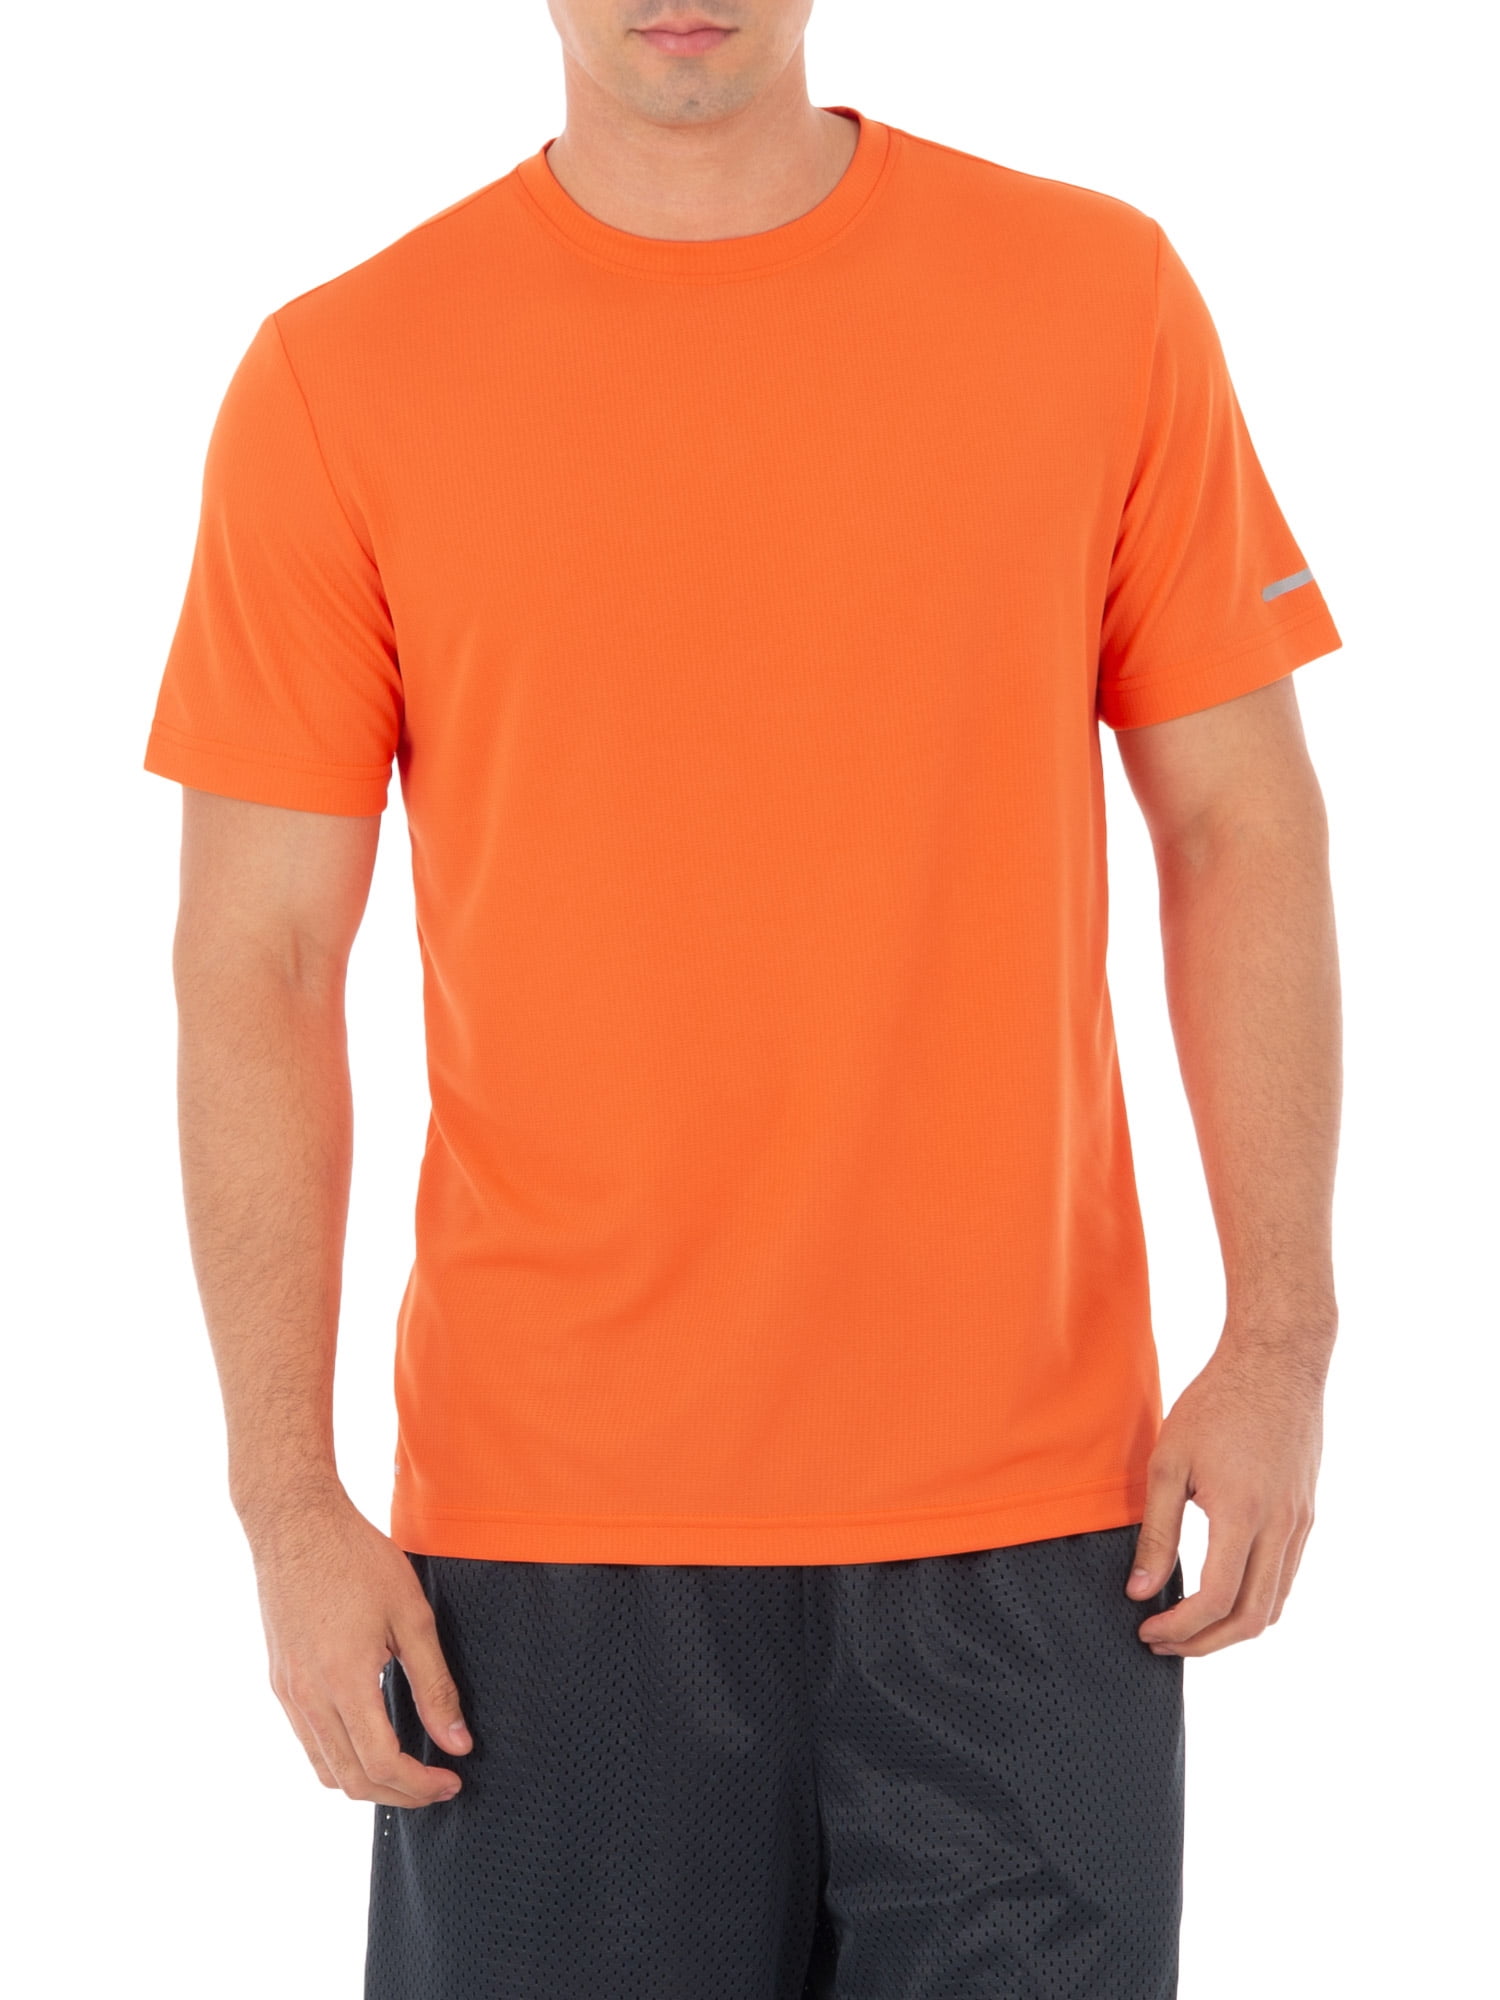 athletic works men's t shirts